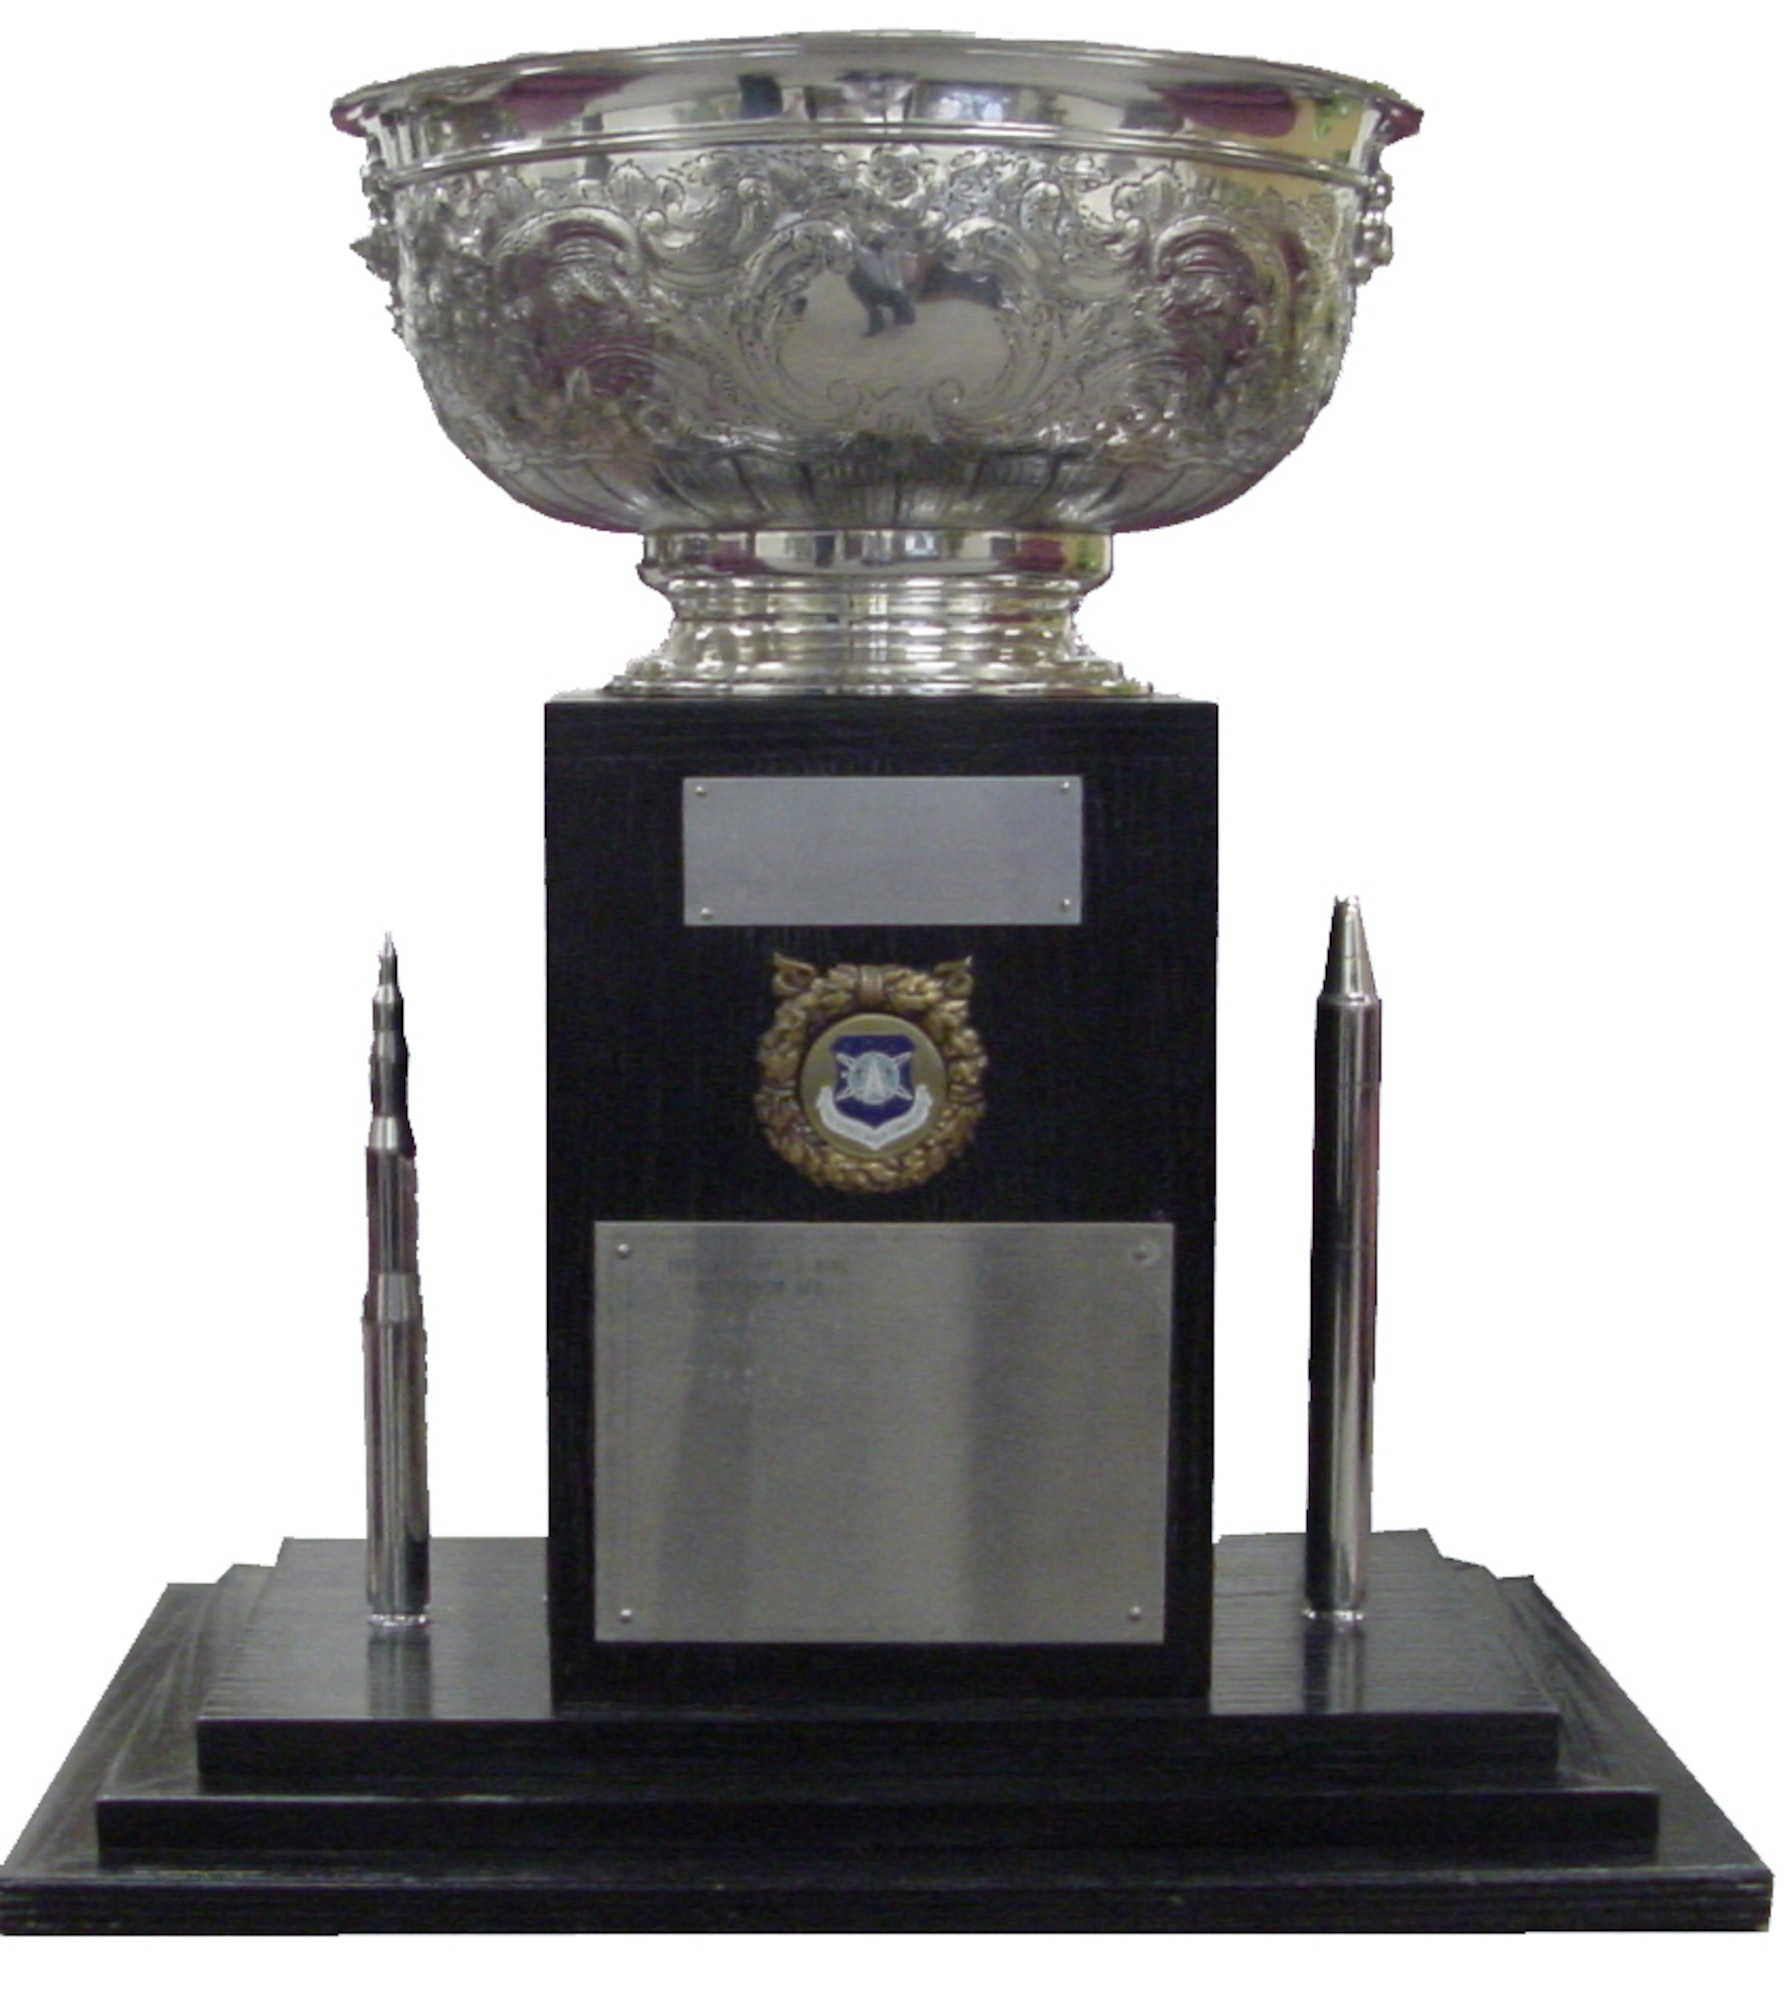 The Blanchard Trophy